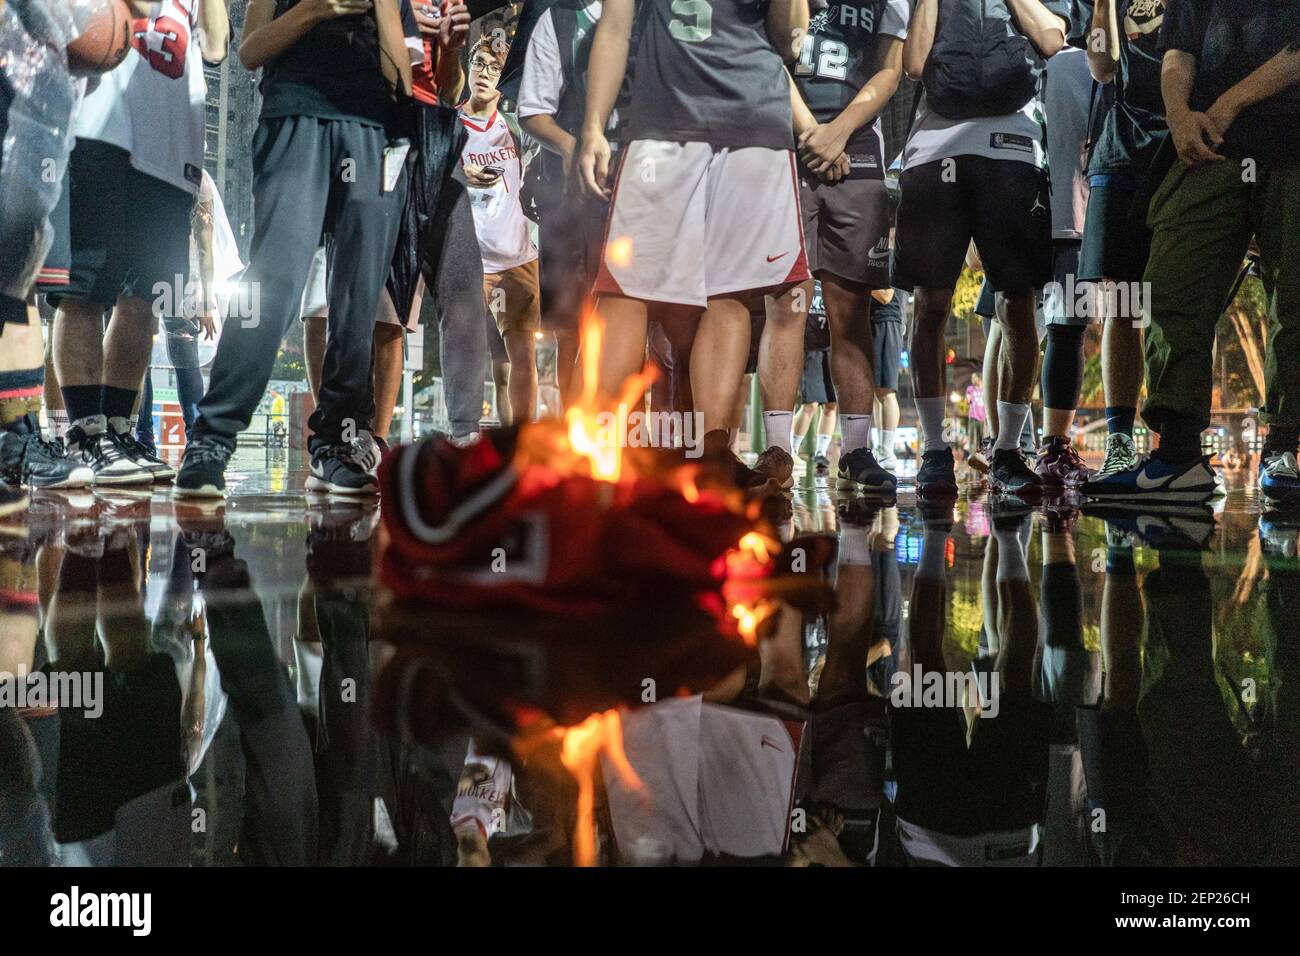 Protesters burn the jersey of Lebron James, during the demonstration.  Hundreds of protesters gathered to express their anger about Lebron James's  tweet and to show support to the General Manager of the